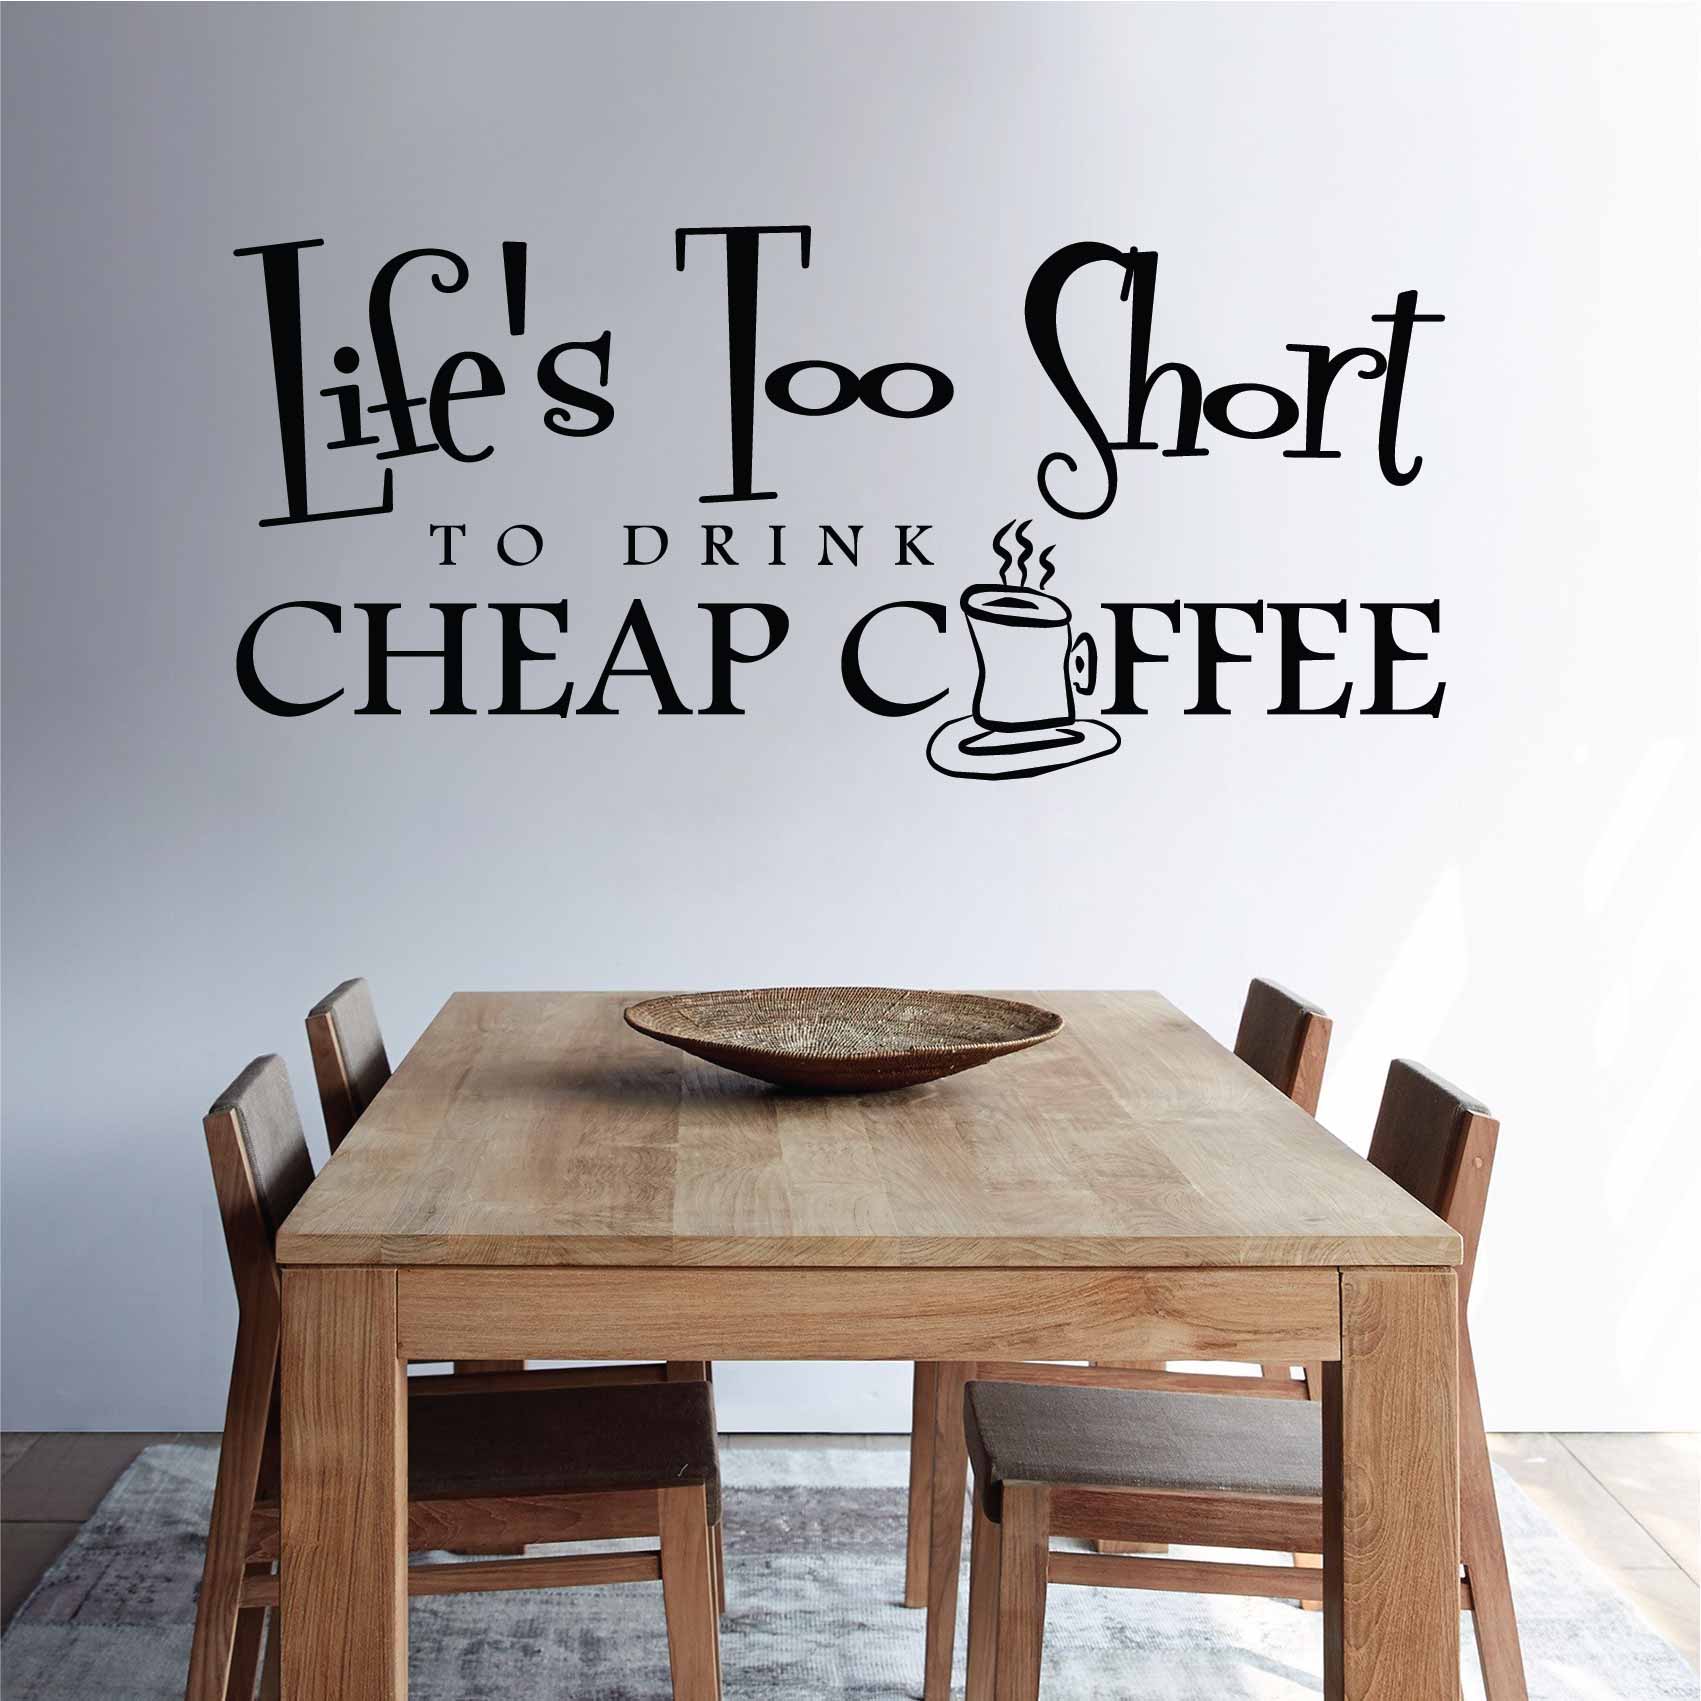 stickers-life-is-too-short-to-drink-cheap-coffee-ref30cafe-stickers-muraux-café-autocollant-deco-chambre-salon-cuisine-sticker-mural-cafe-coffee